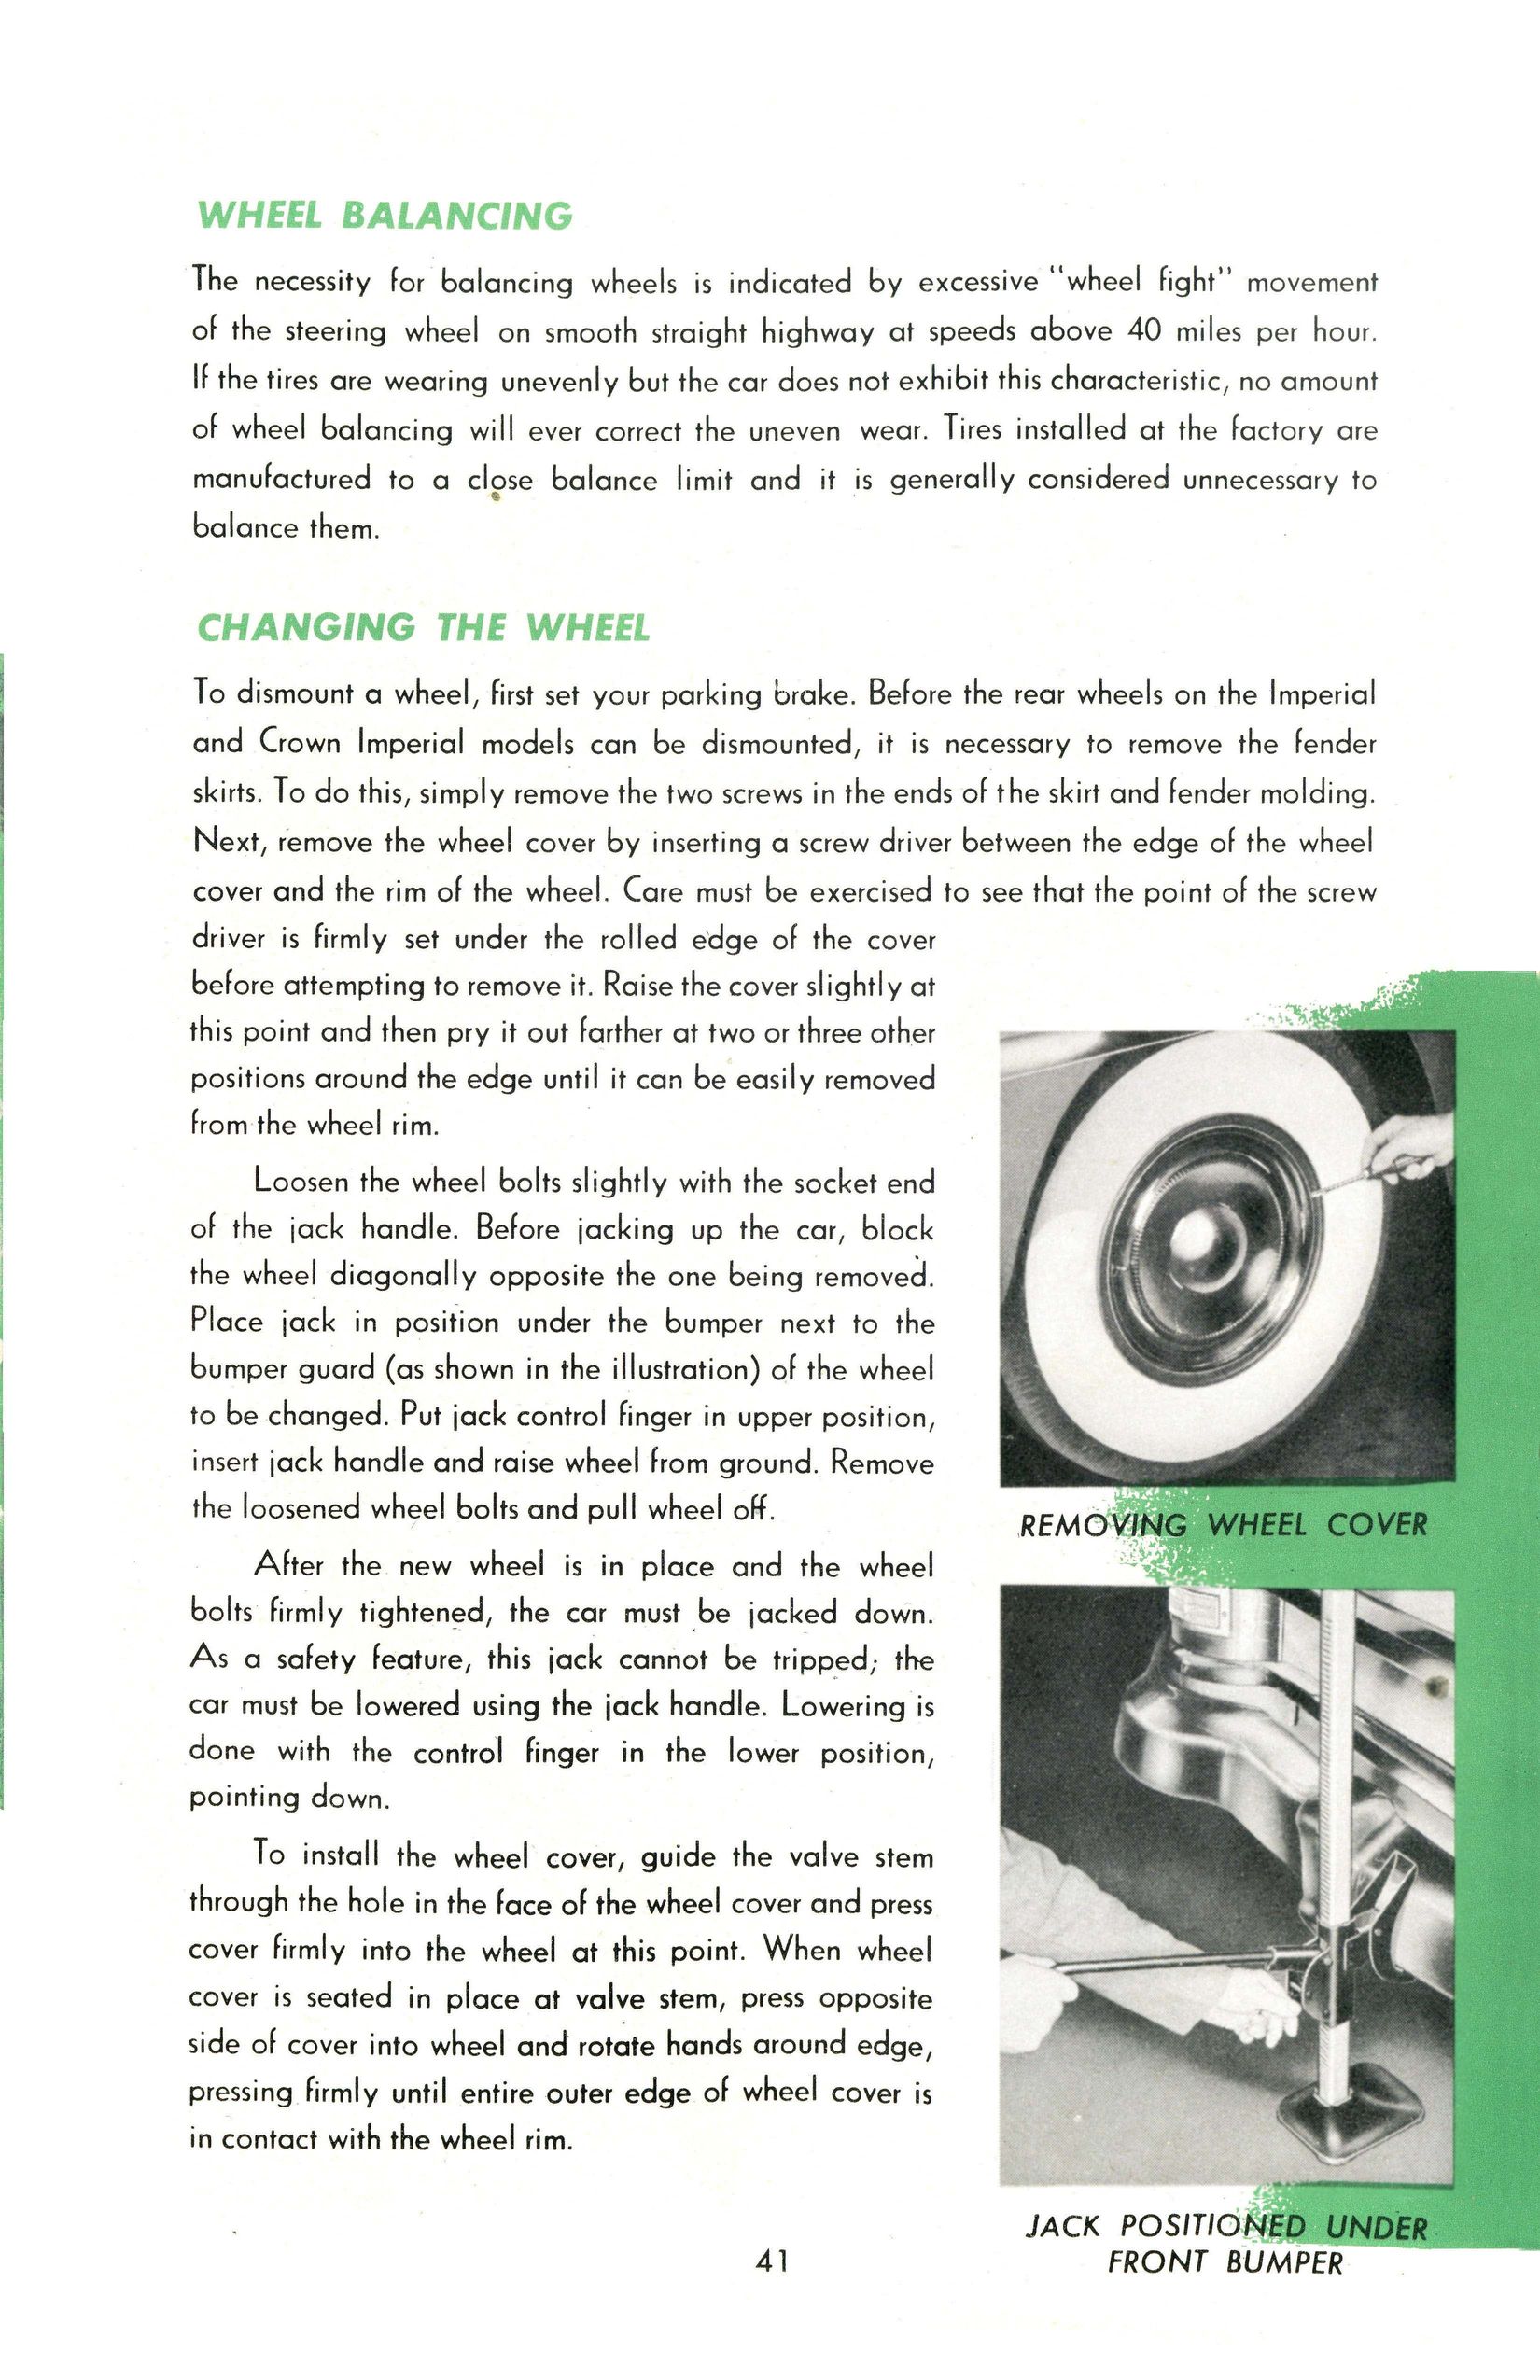 1951 Chrysler Saratoga New York Imperial Manual Page 29